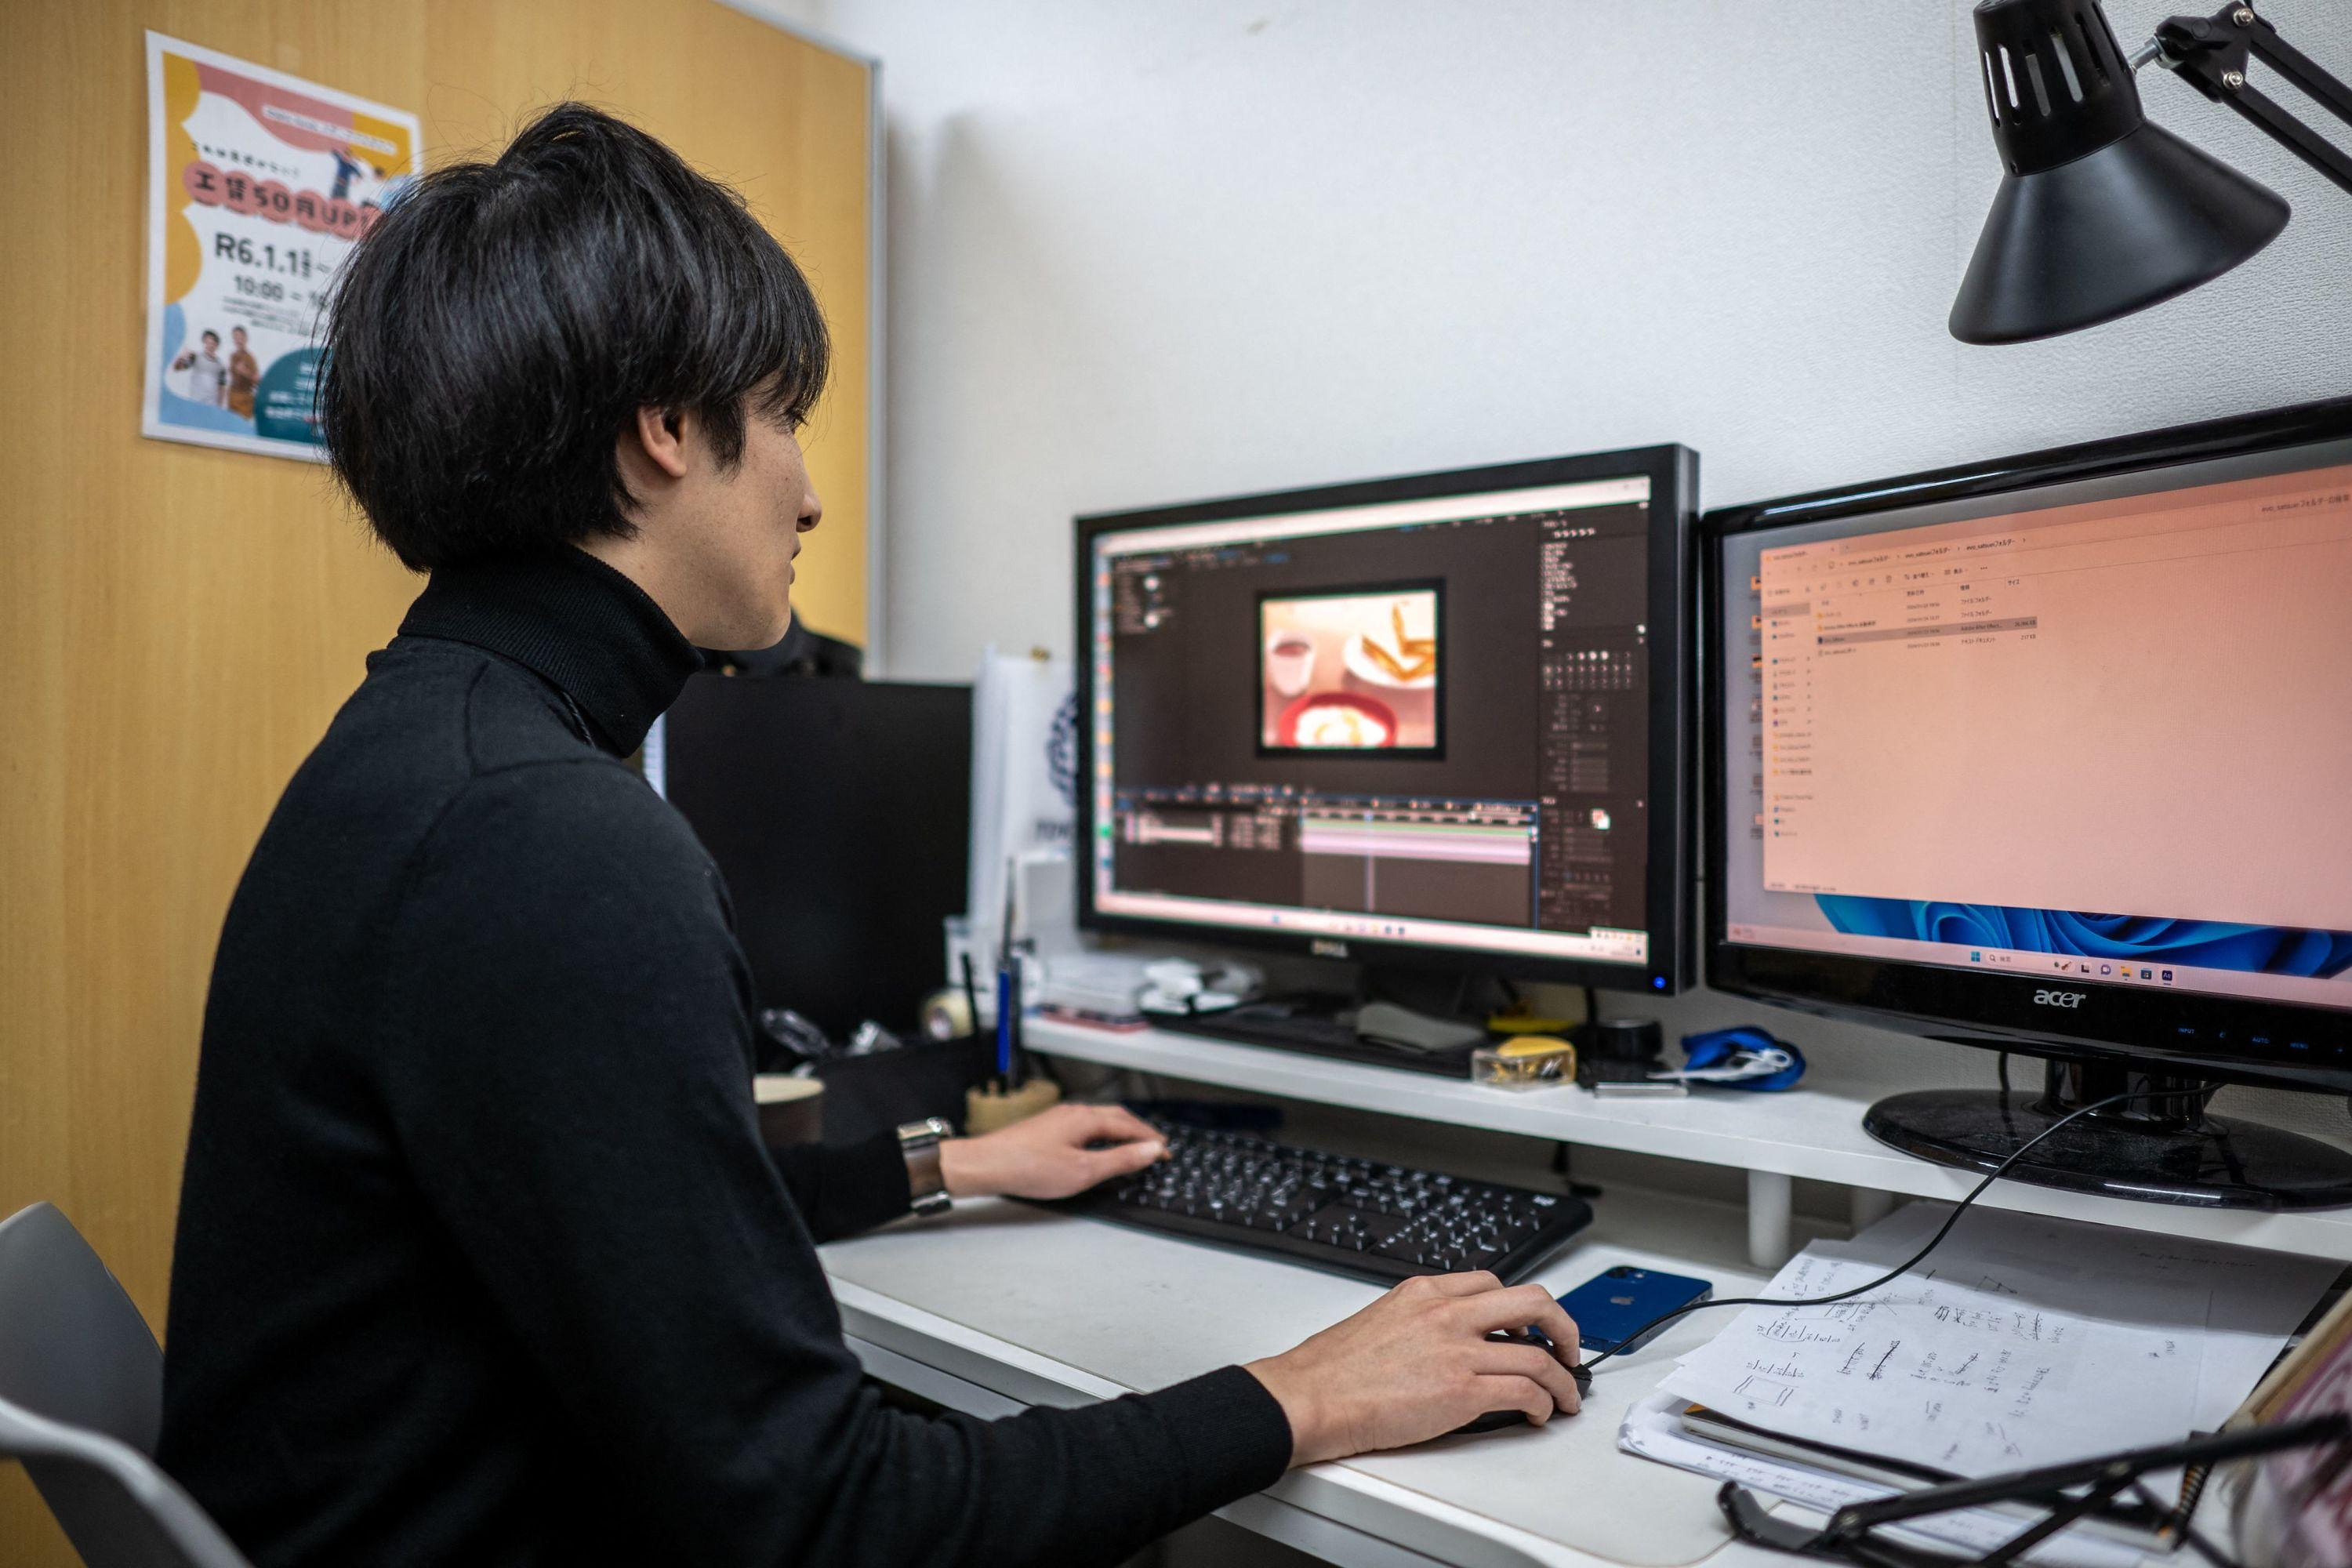 In Japan, an animation studio bets on its creators suffering from autism spectrum disorders